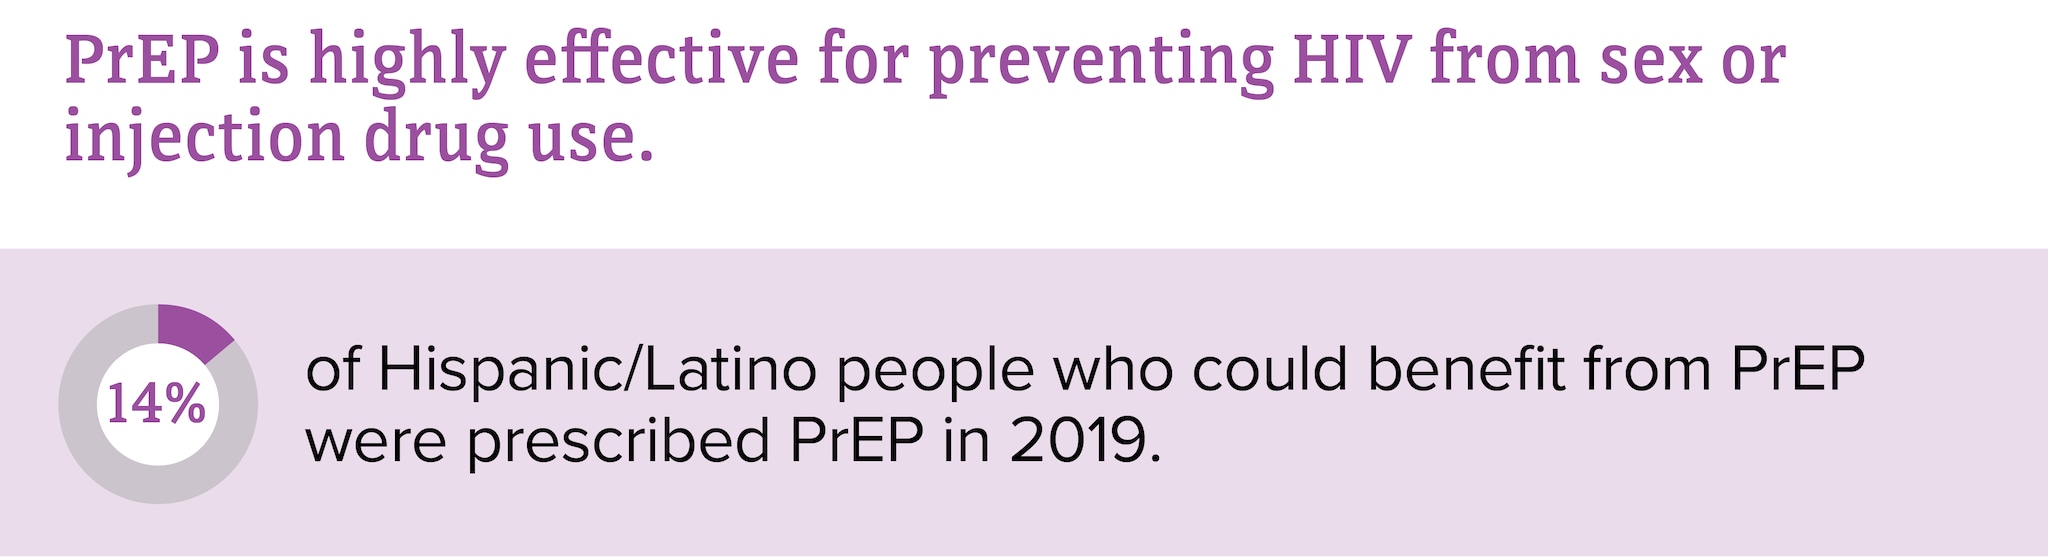 This chart shows 14 percent of Hispanic/Latino people who could benefit from PrEP were prescribed it.